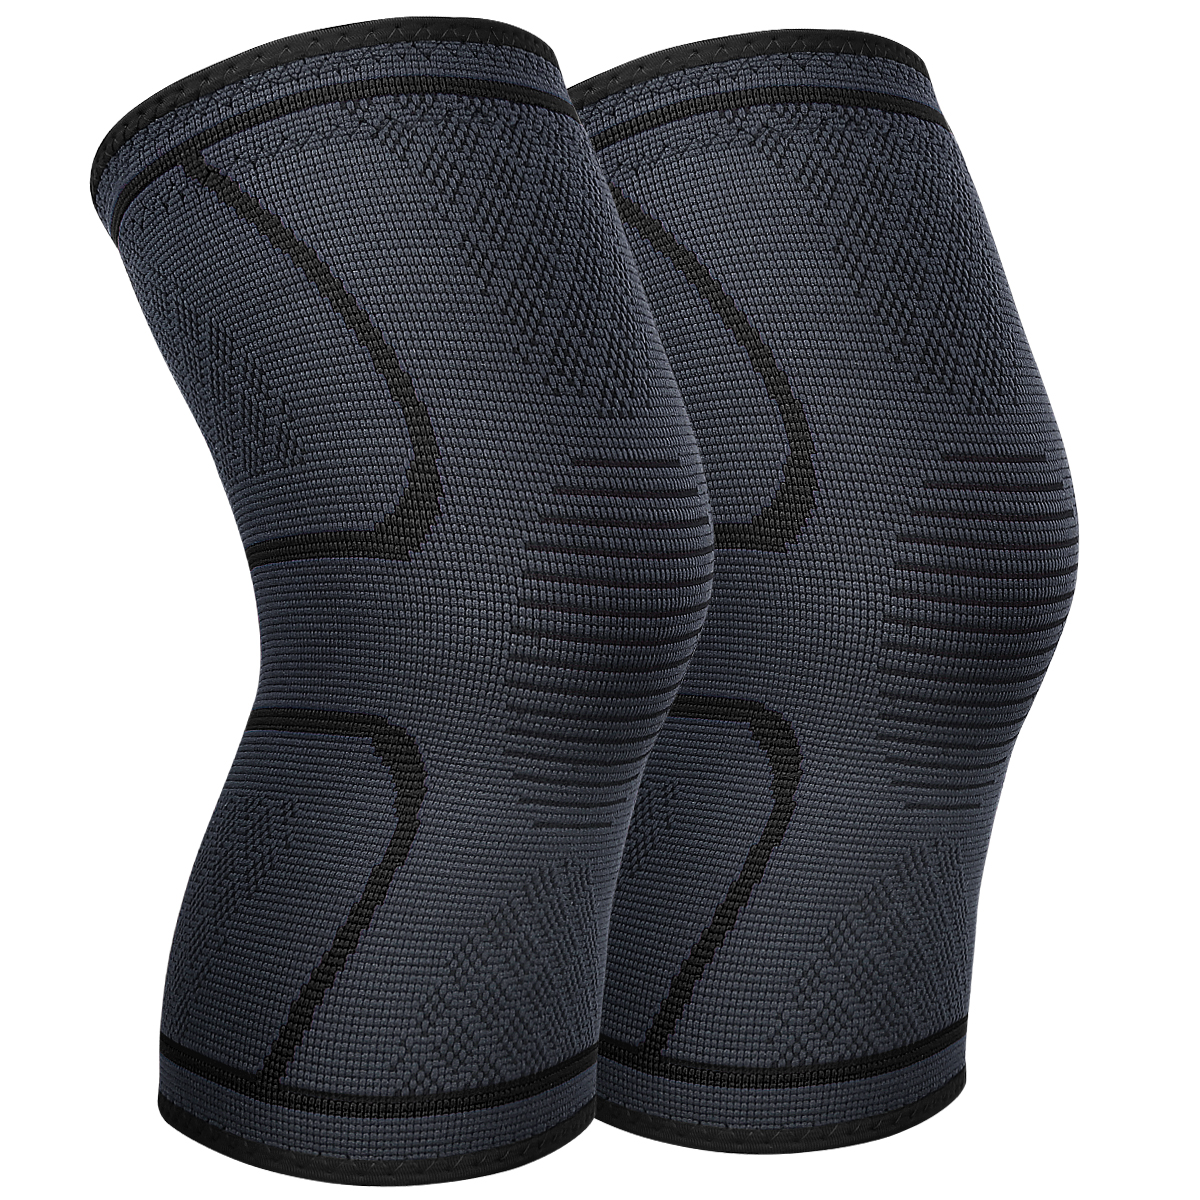 Knee Brace Support Pair for Men Women, AVIDDA Compression Knee Sleeve for Joint Pain Relief, Arthritis, Meniscus Tear, Injury Recovery, Running, Squats, Weight Lifting, Football Gray XL